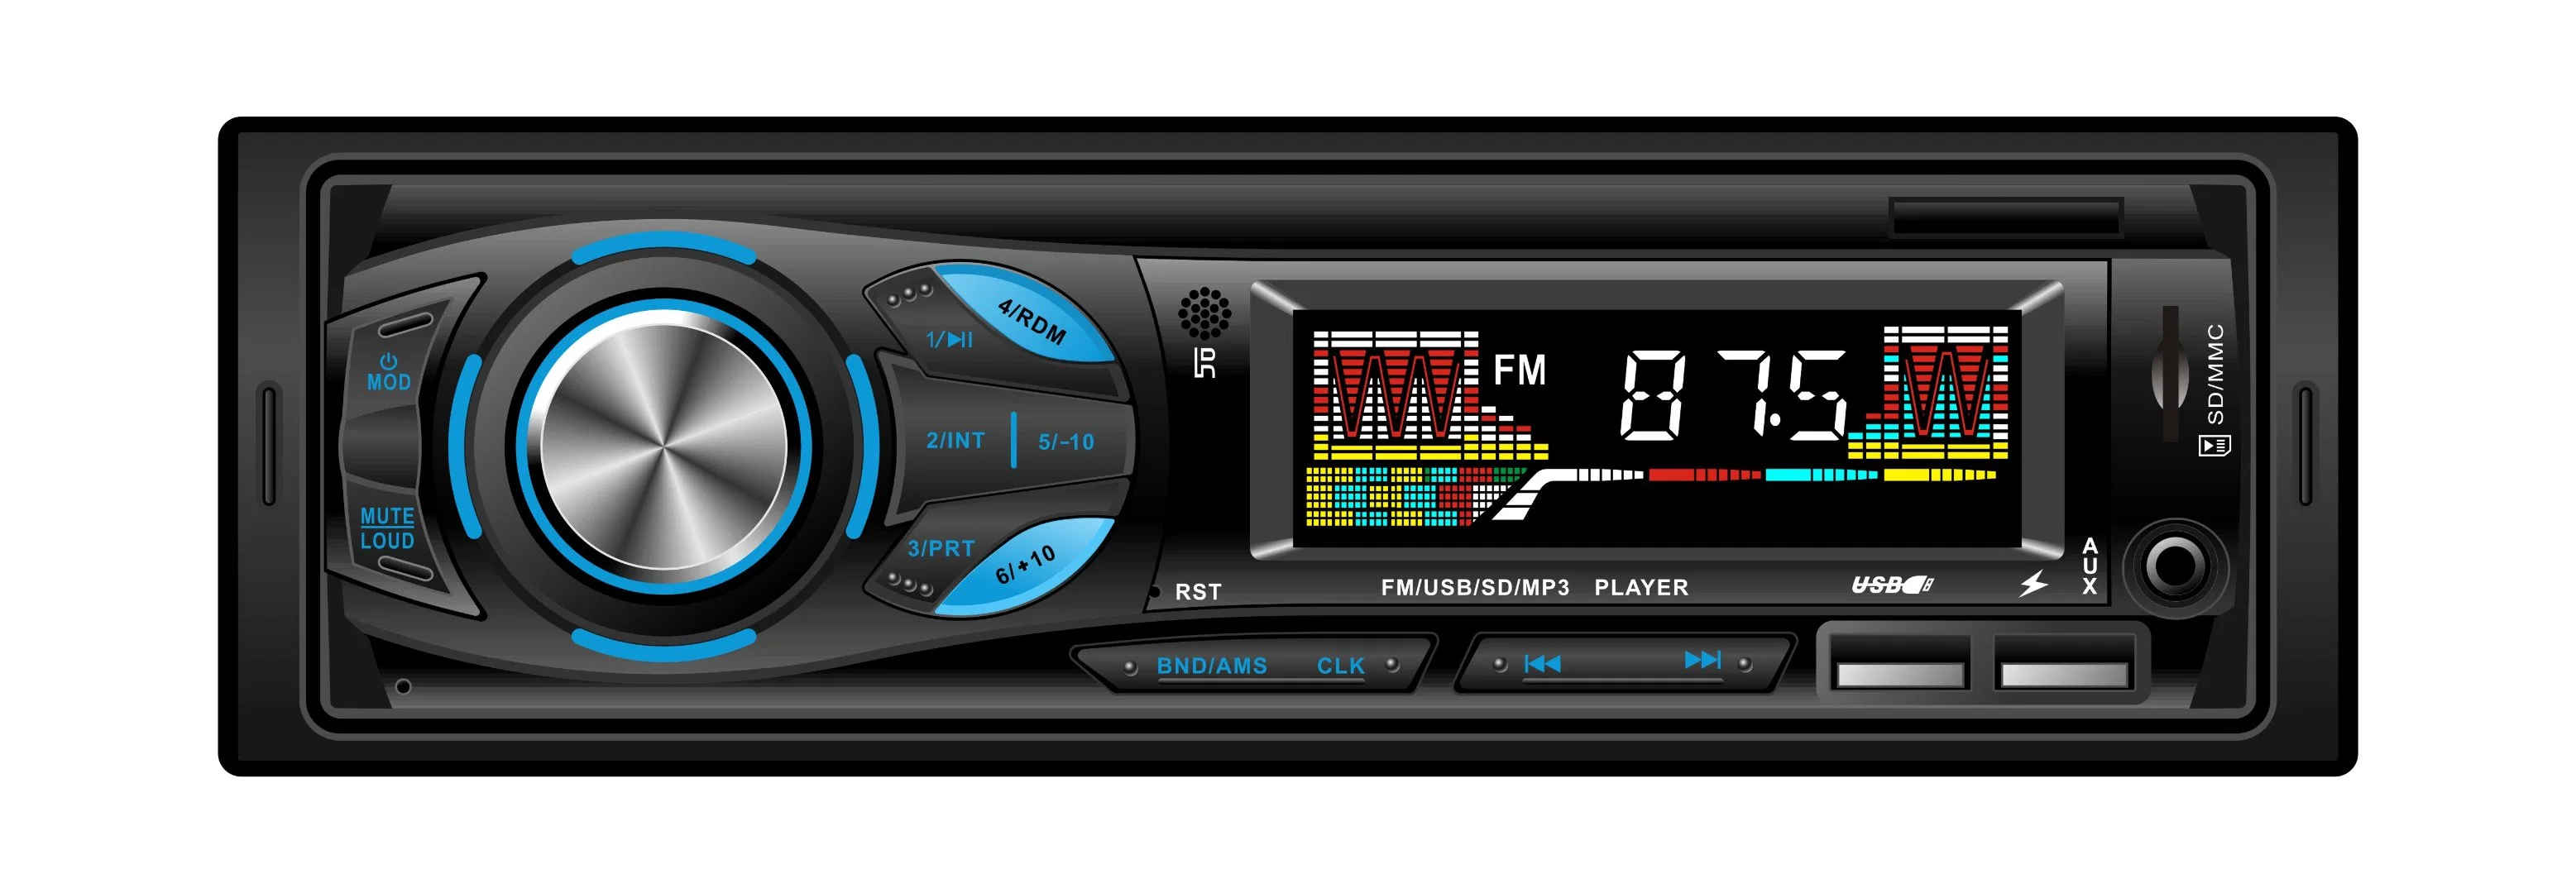 Electronics Car Stereo Bluetooth Audio Two USB MP3 Player